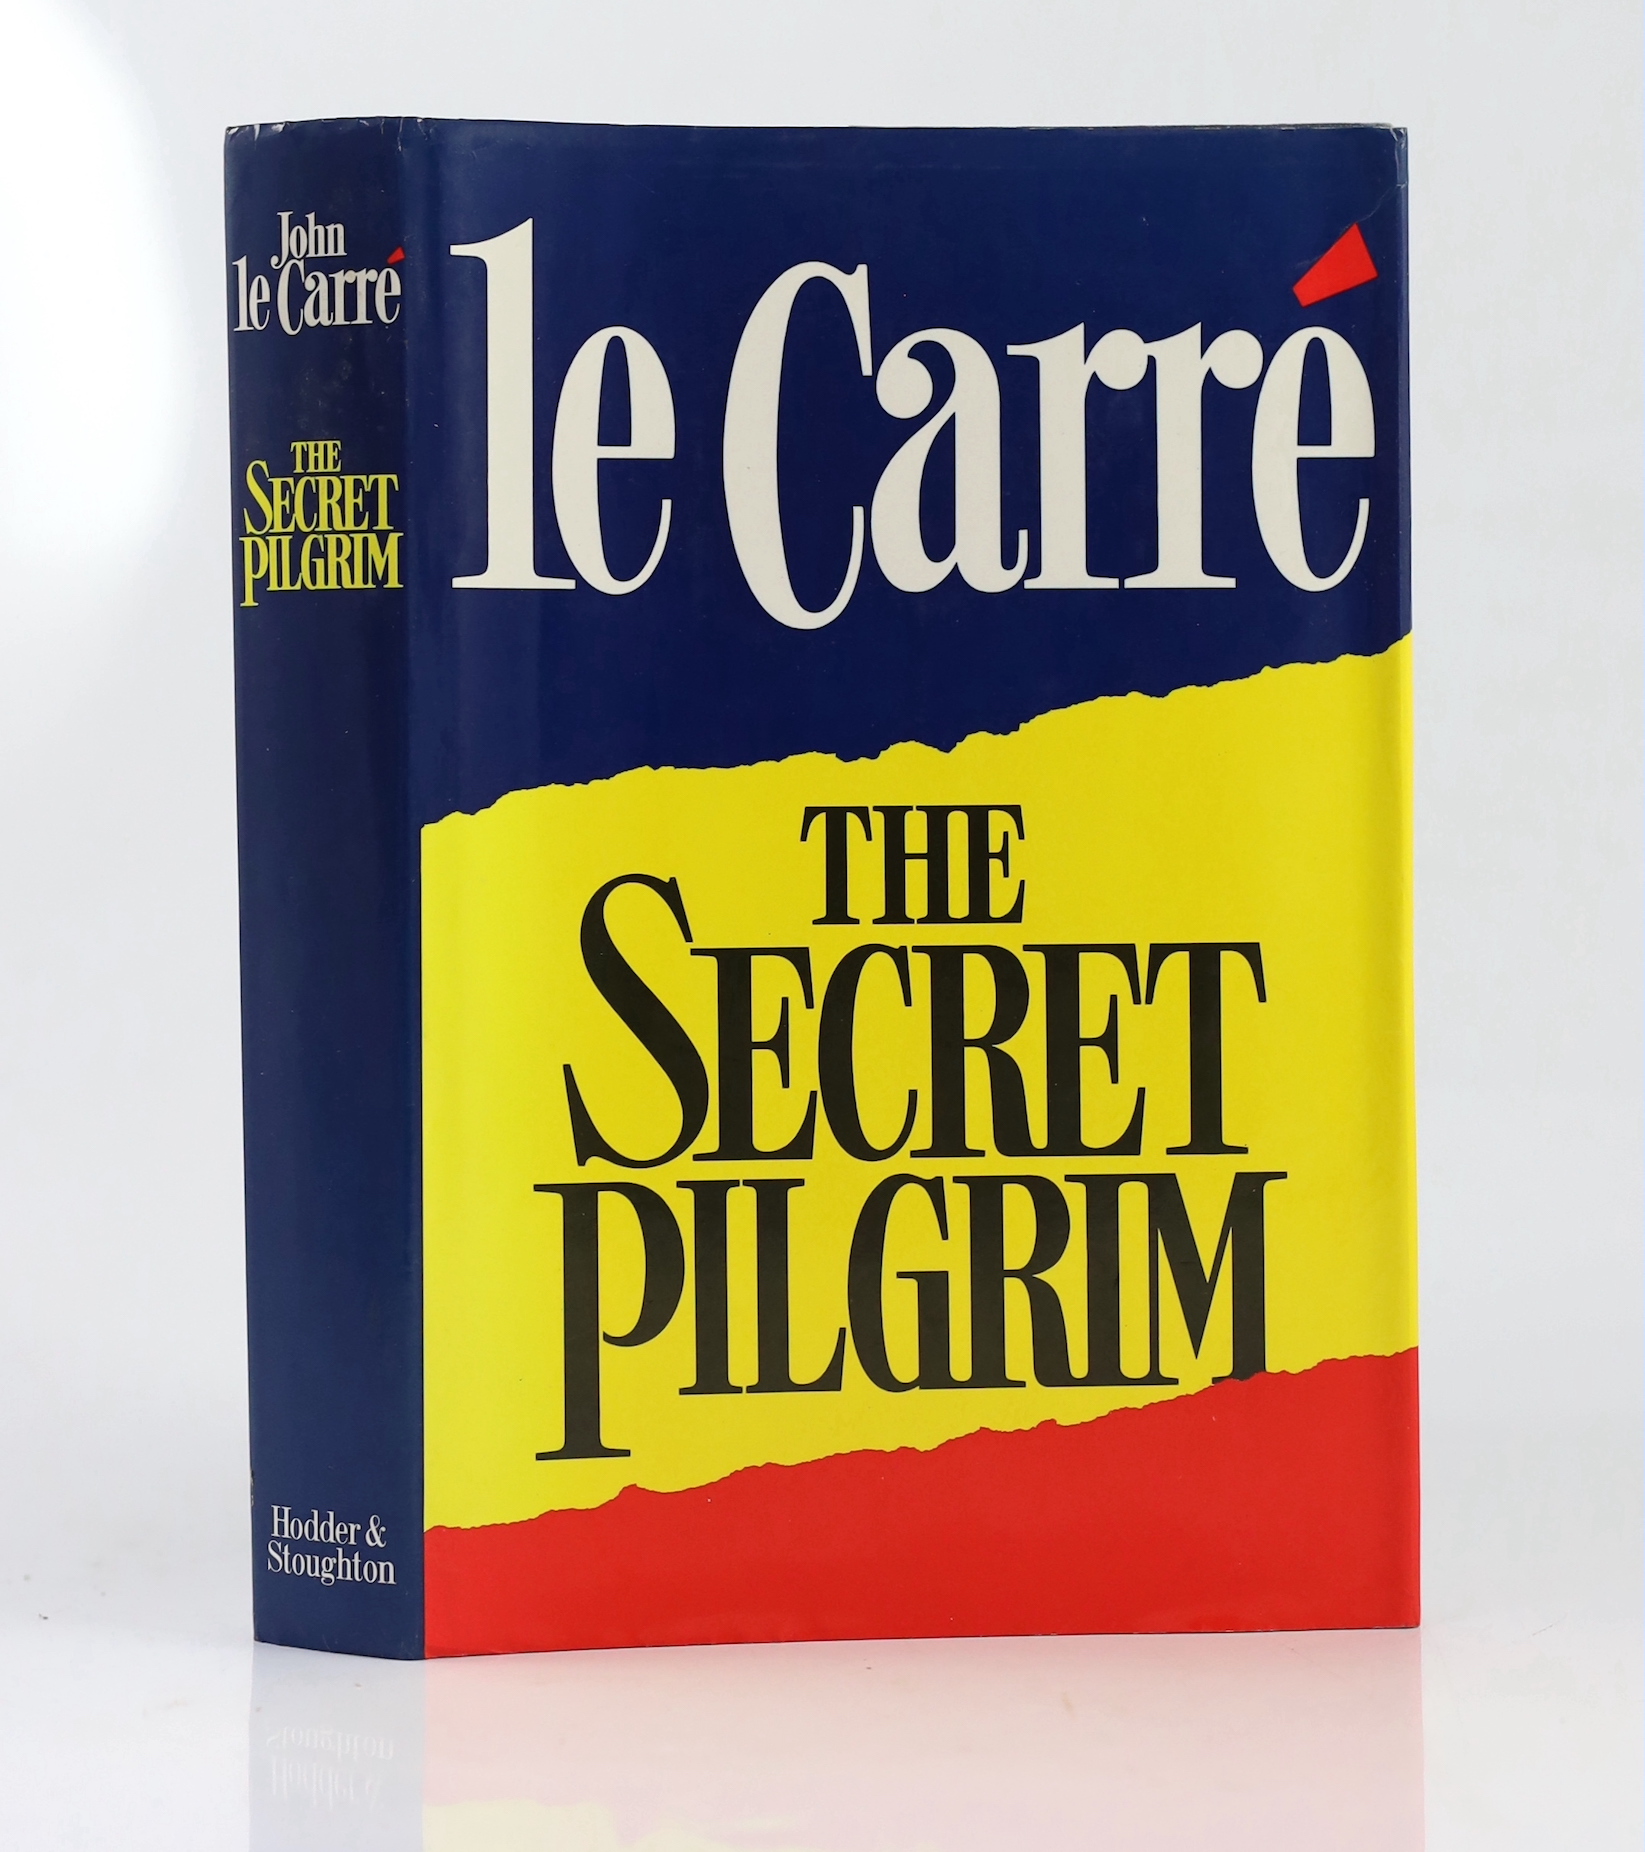 Le Carre, John - The Secret Pilgrim, 1st edition, signed by the author on title, 8vo, original cloth in a unclipped d/j, Hodder & Stoughton, London, 1981